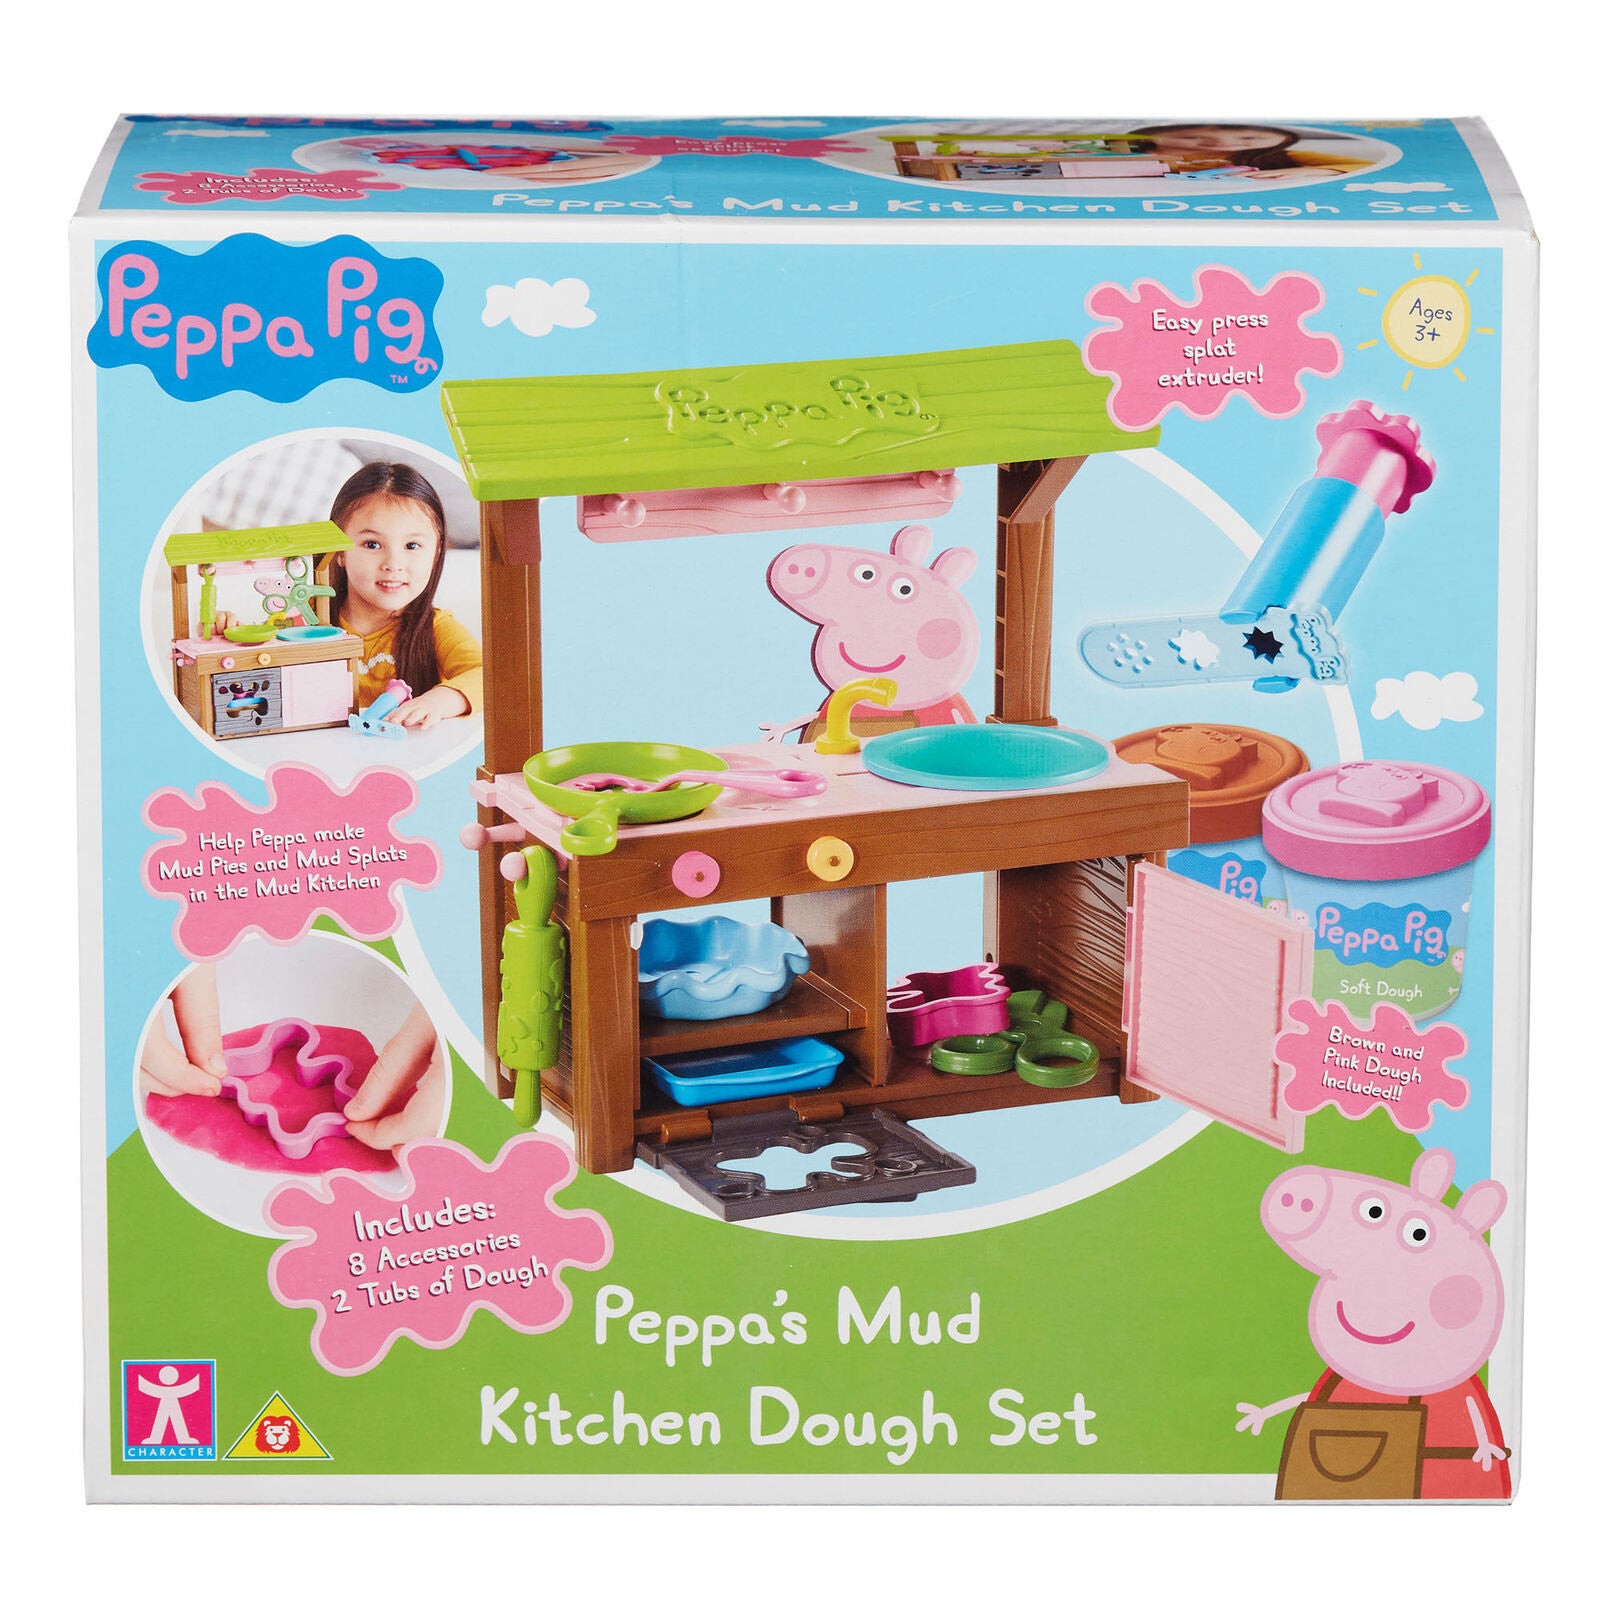 07038 Peppa Pig Peppa's Mud Kitchen Dough Set with 2 Tubs of Soft Dough Age 3+